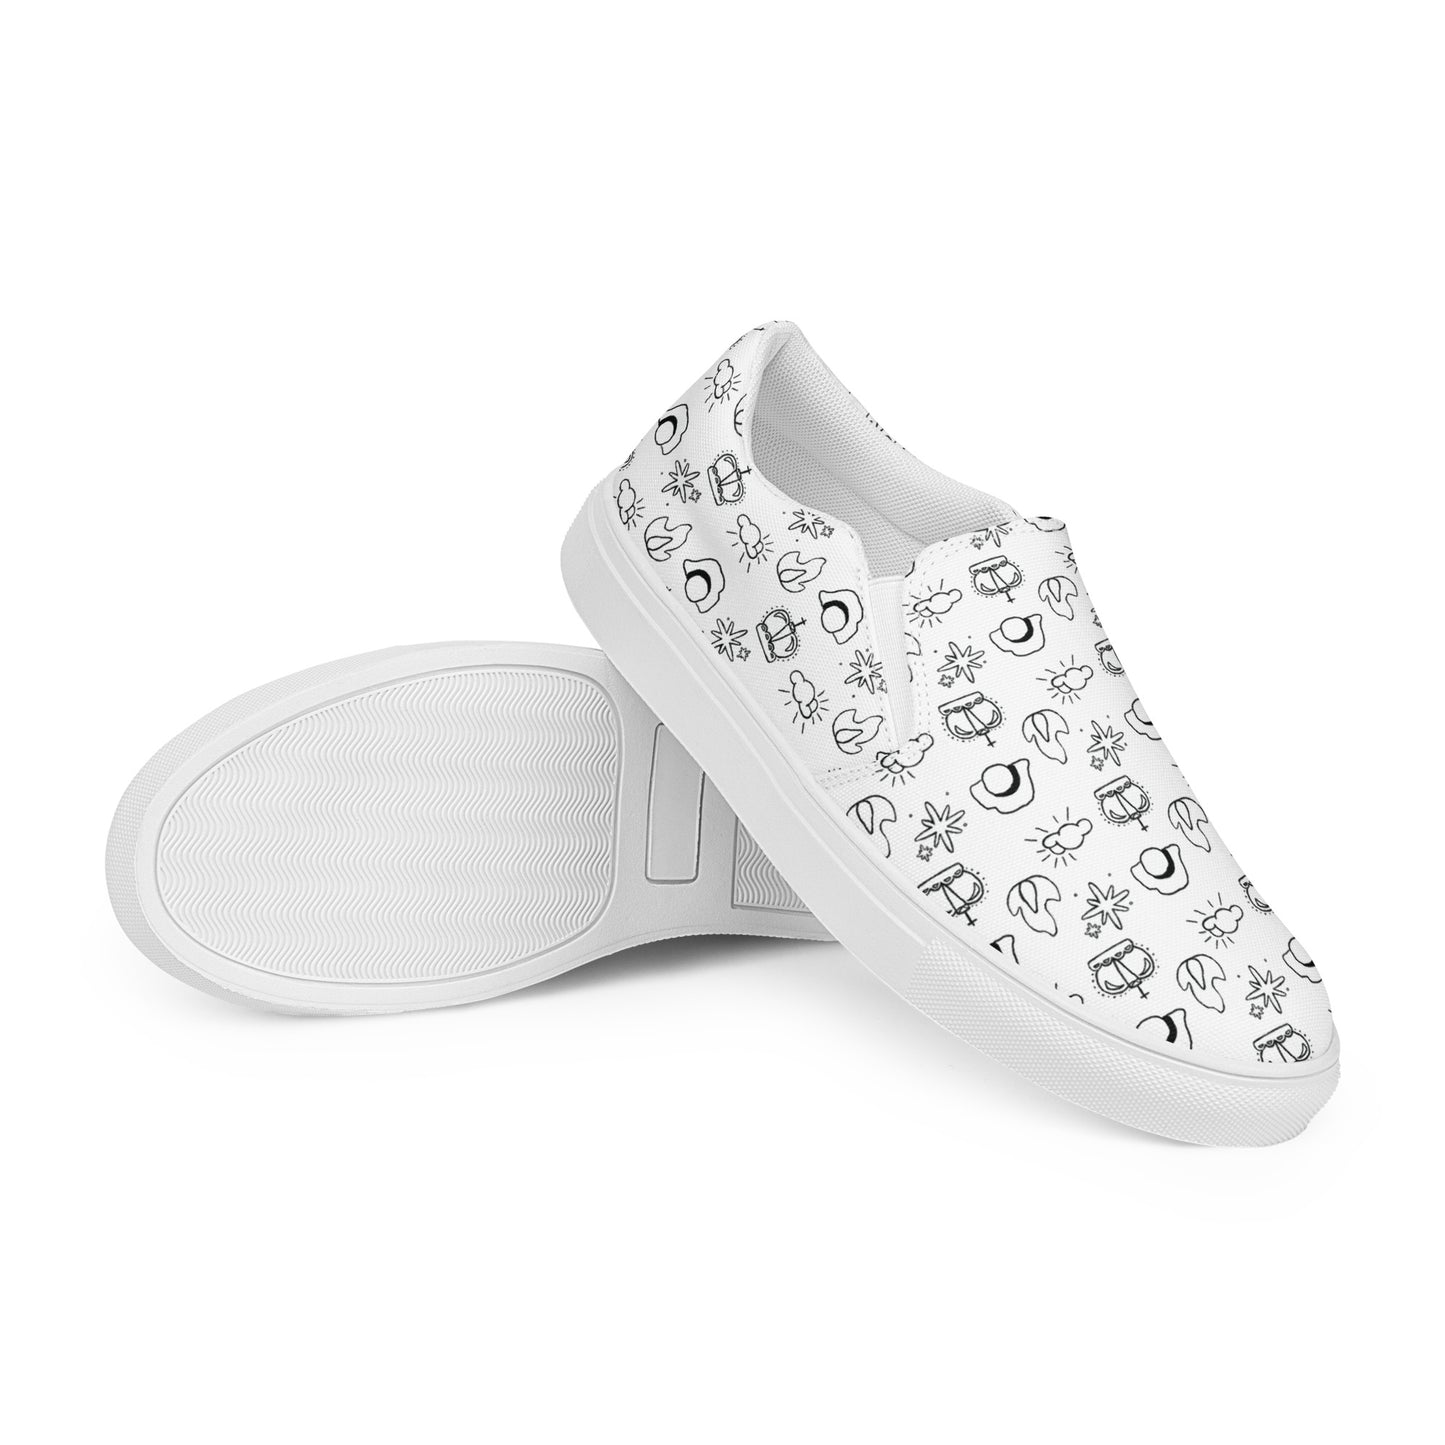 "Walking with the Saints | Glorious Mysteries" – Women’s Slip-On's